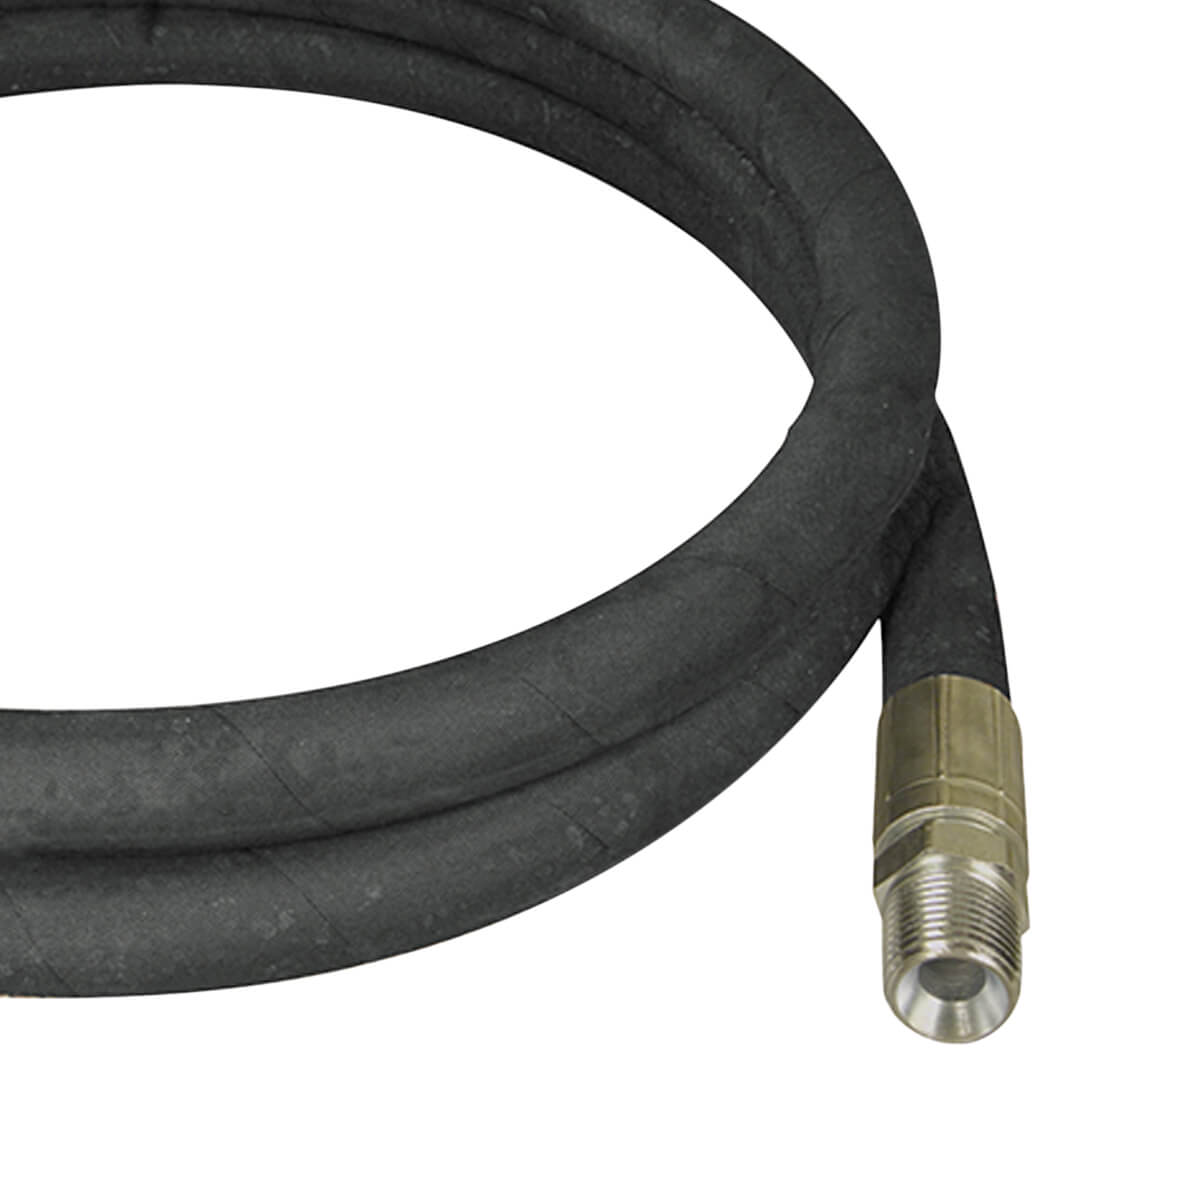 Hydraulic Hose Assembly - Male x Male - 1/2-in x 30-in